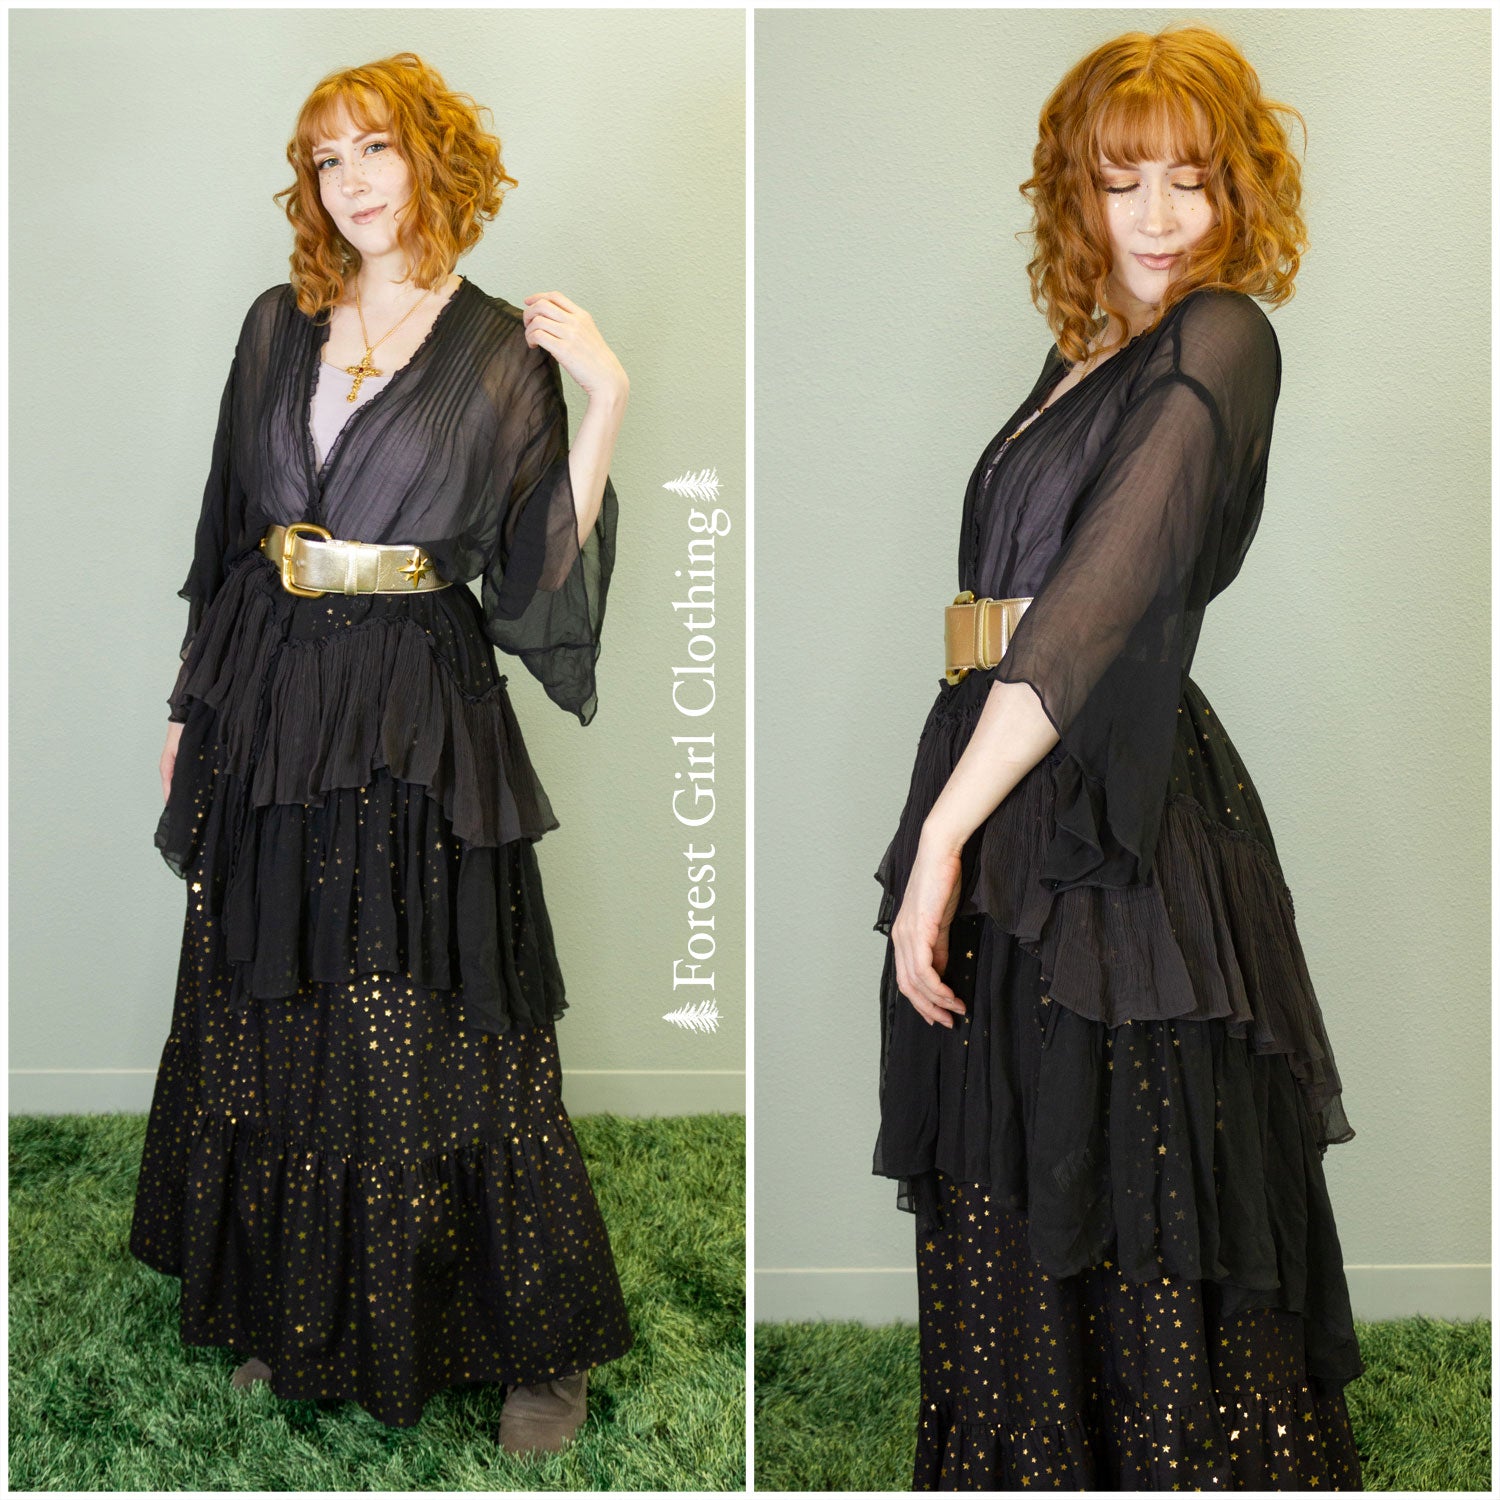 A dramatic, gauzy black robe draped over a light undershirt and cinched at the waist. The accents are both gold and silver.